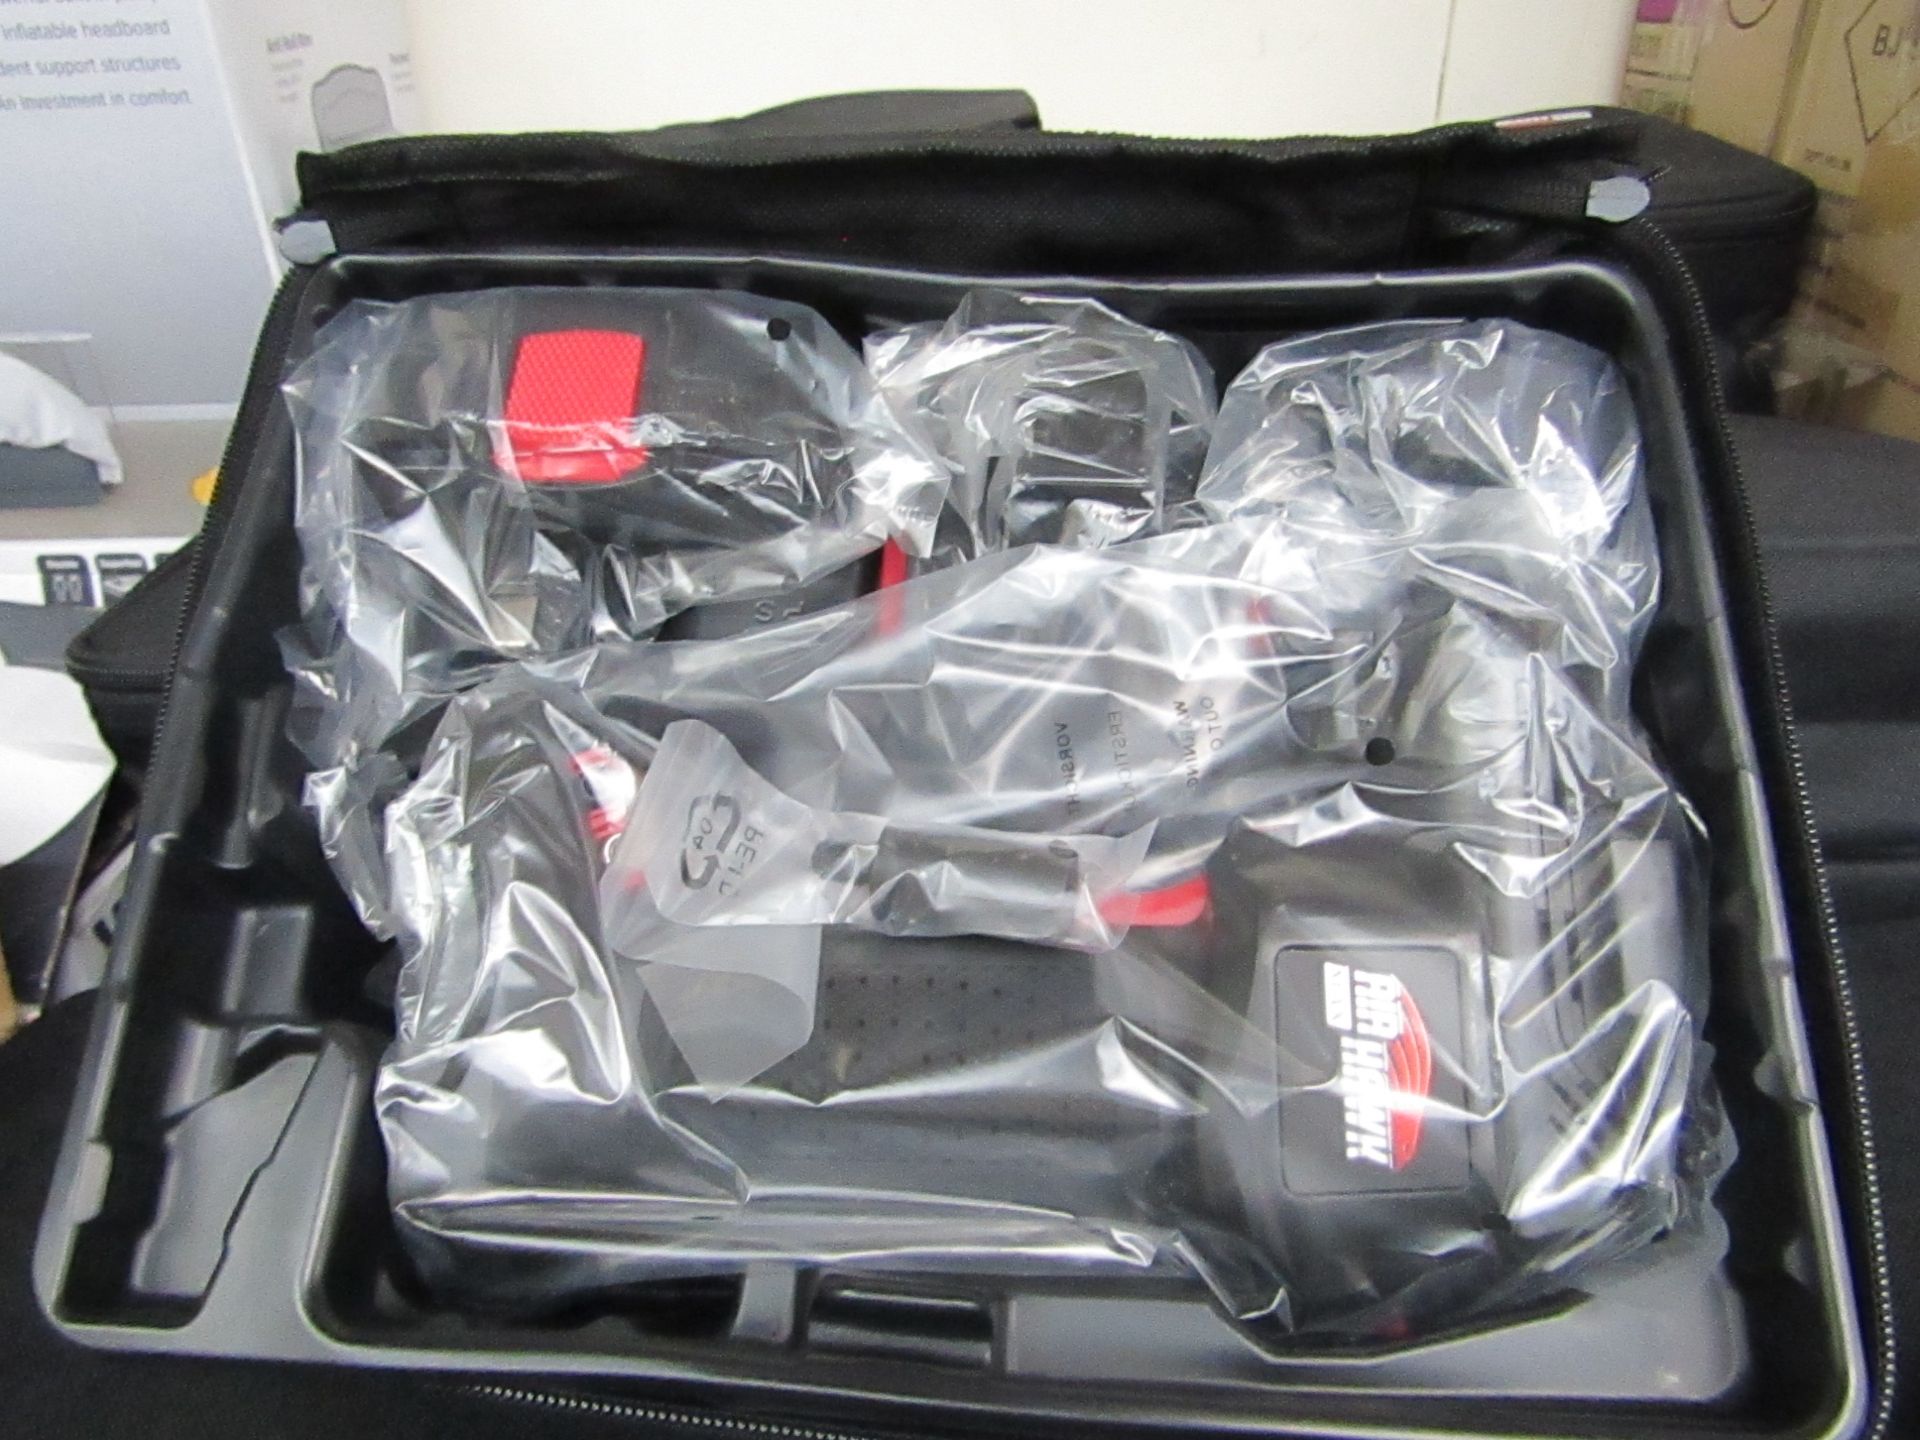 | 1x | AIR HAWK PRO CORDLESS HANDHELD COMPRESSOR | TESTED WORKING & BOXED | NO ONLINE RE-SALE |